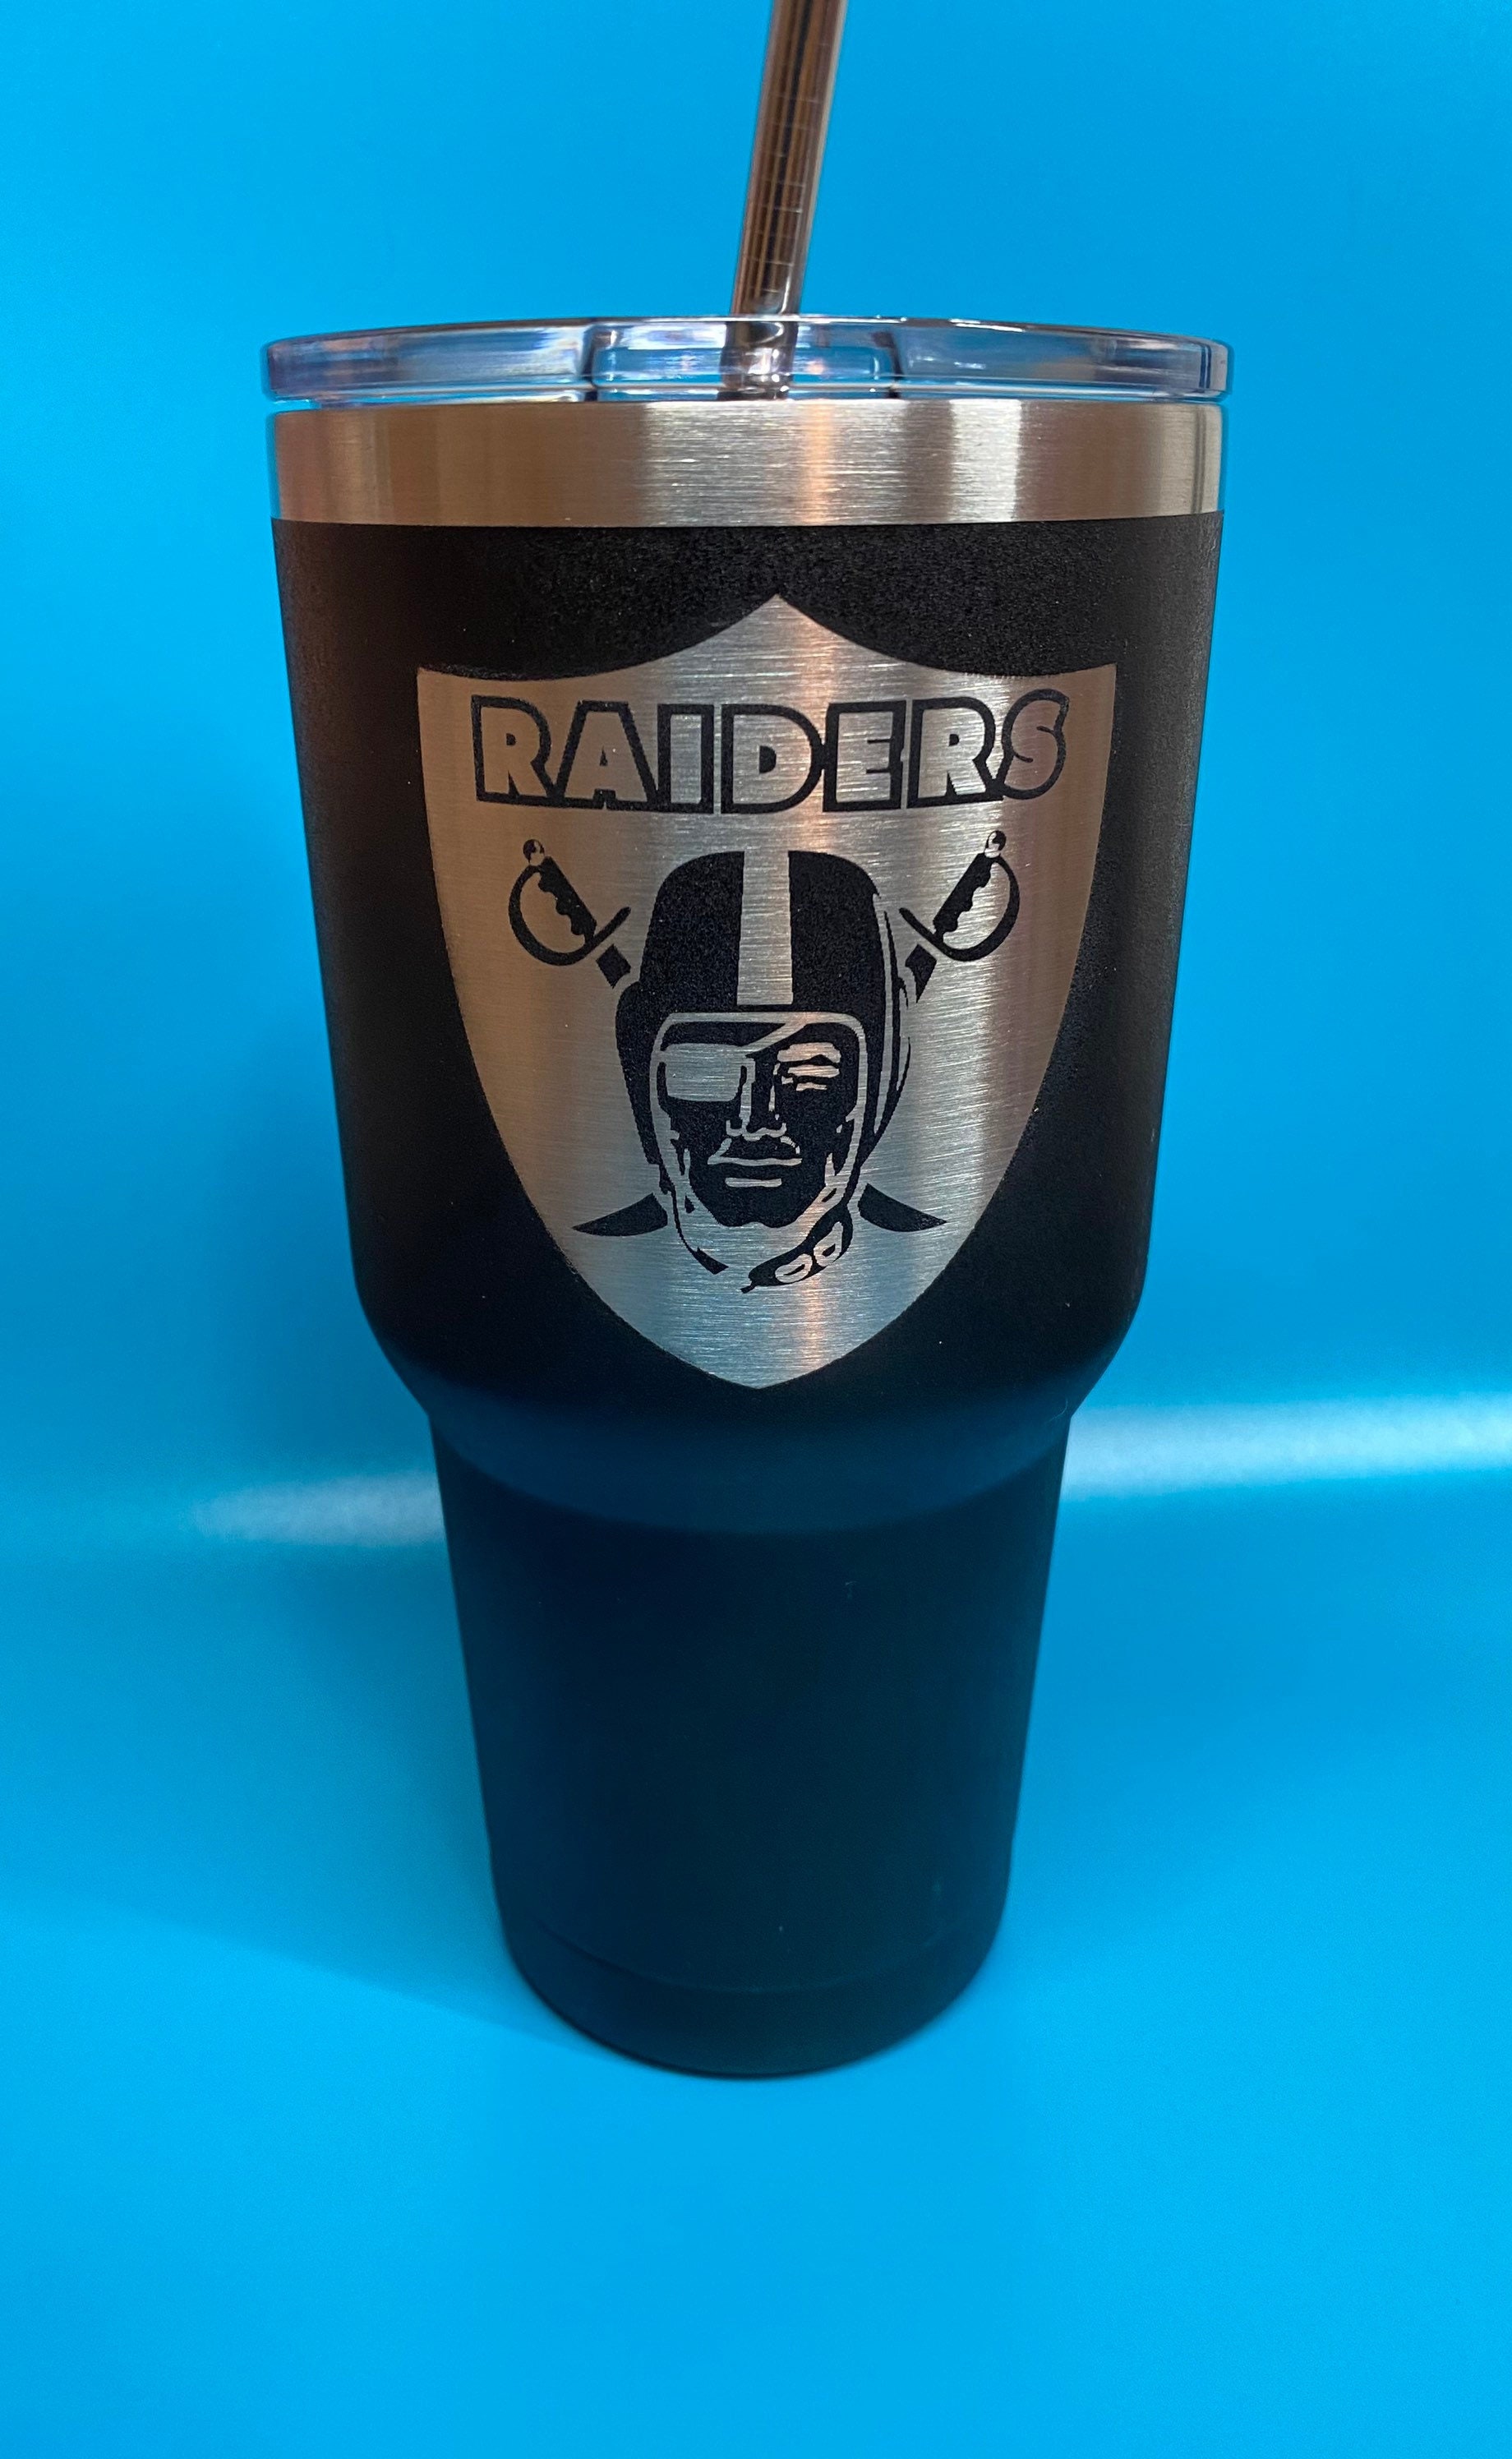 Las Vegas Raiders 16oz. Game Day Stainless Curved Tumbler